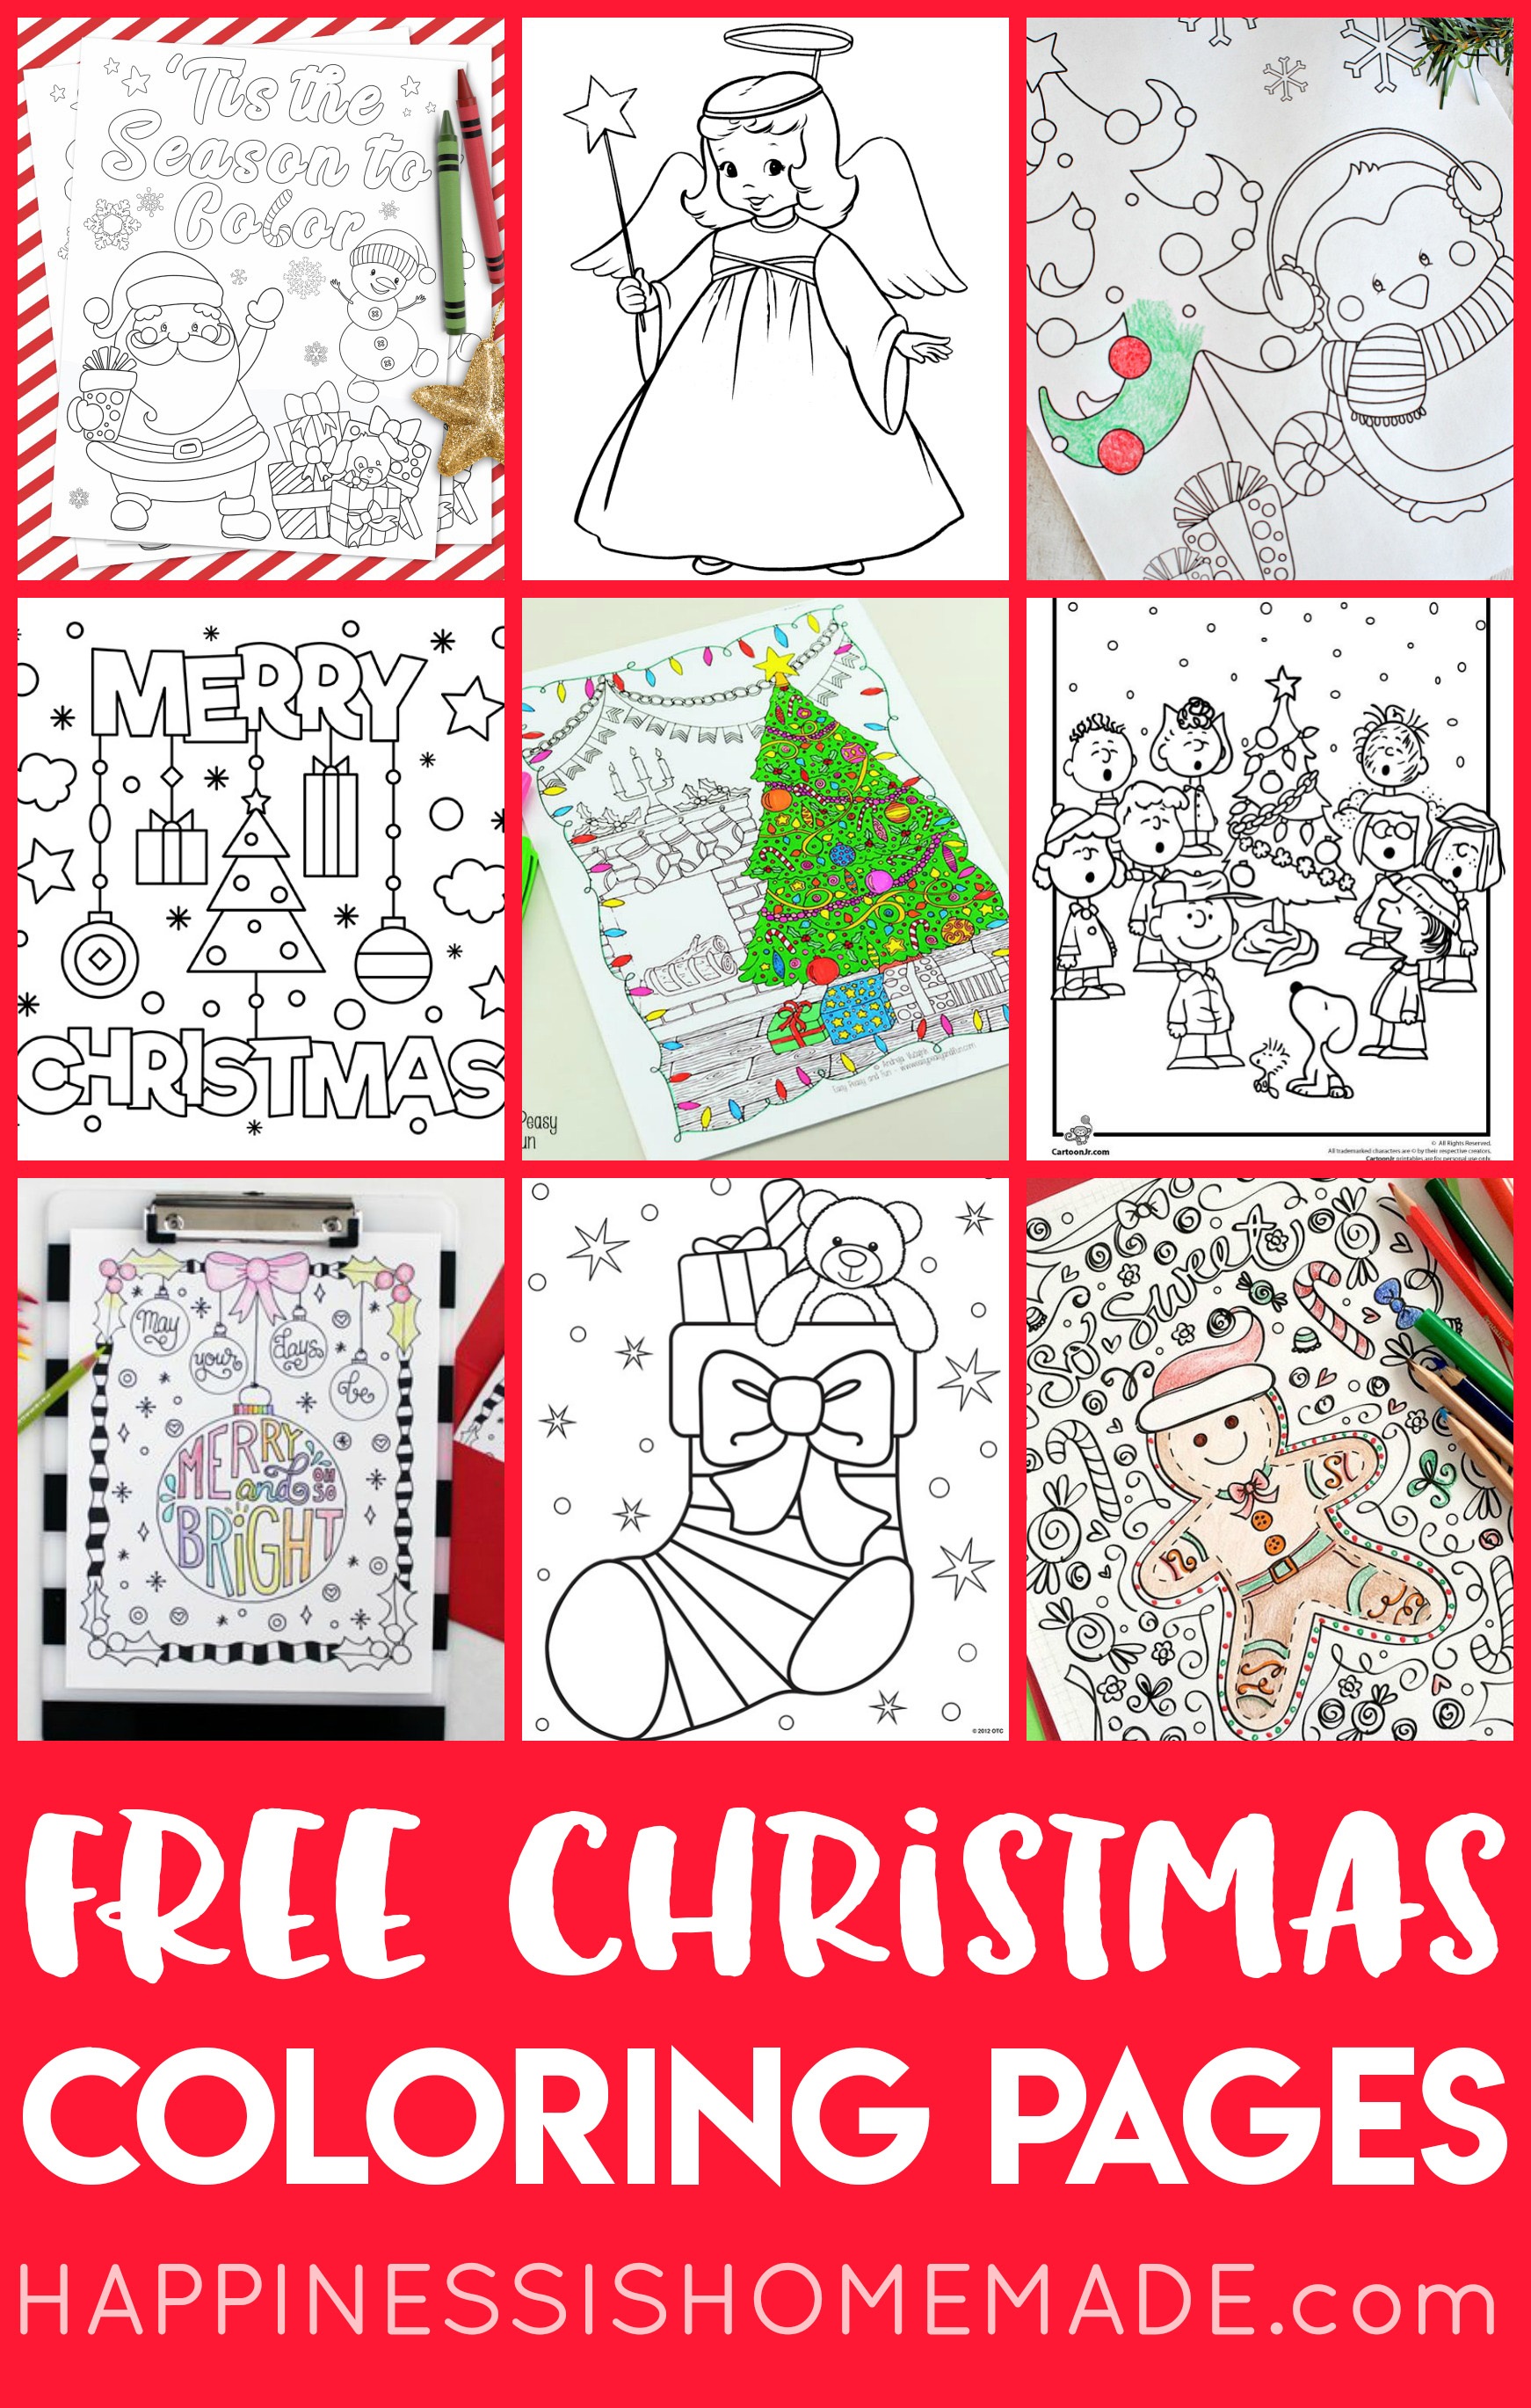 Free Christmas Coloring Pages For Adults And Kids - Happiness Is - Free Printable Christmas Coloring Pages For Kids